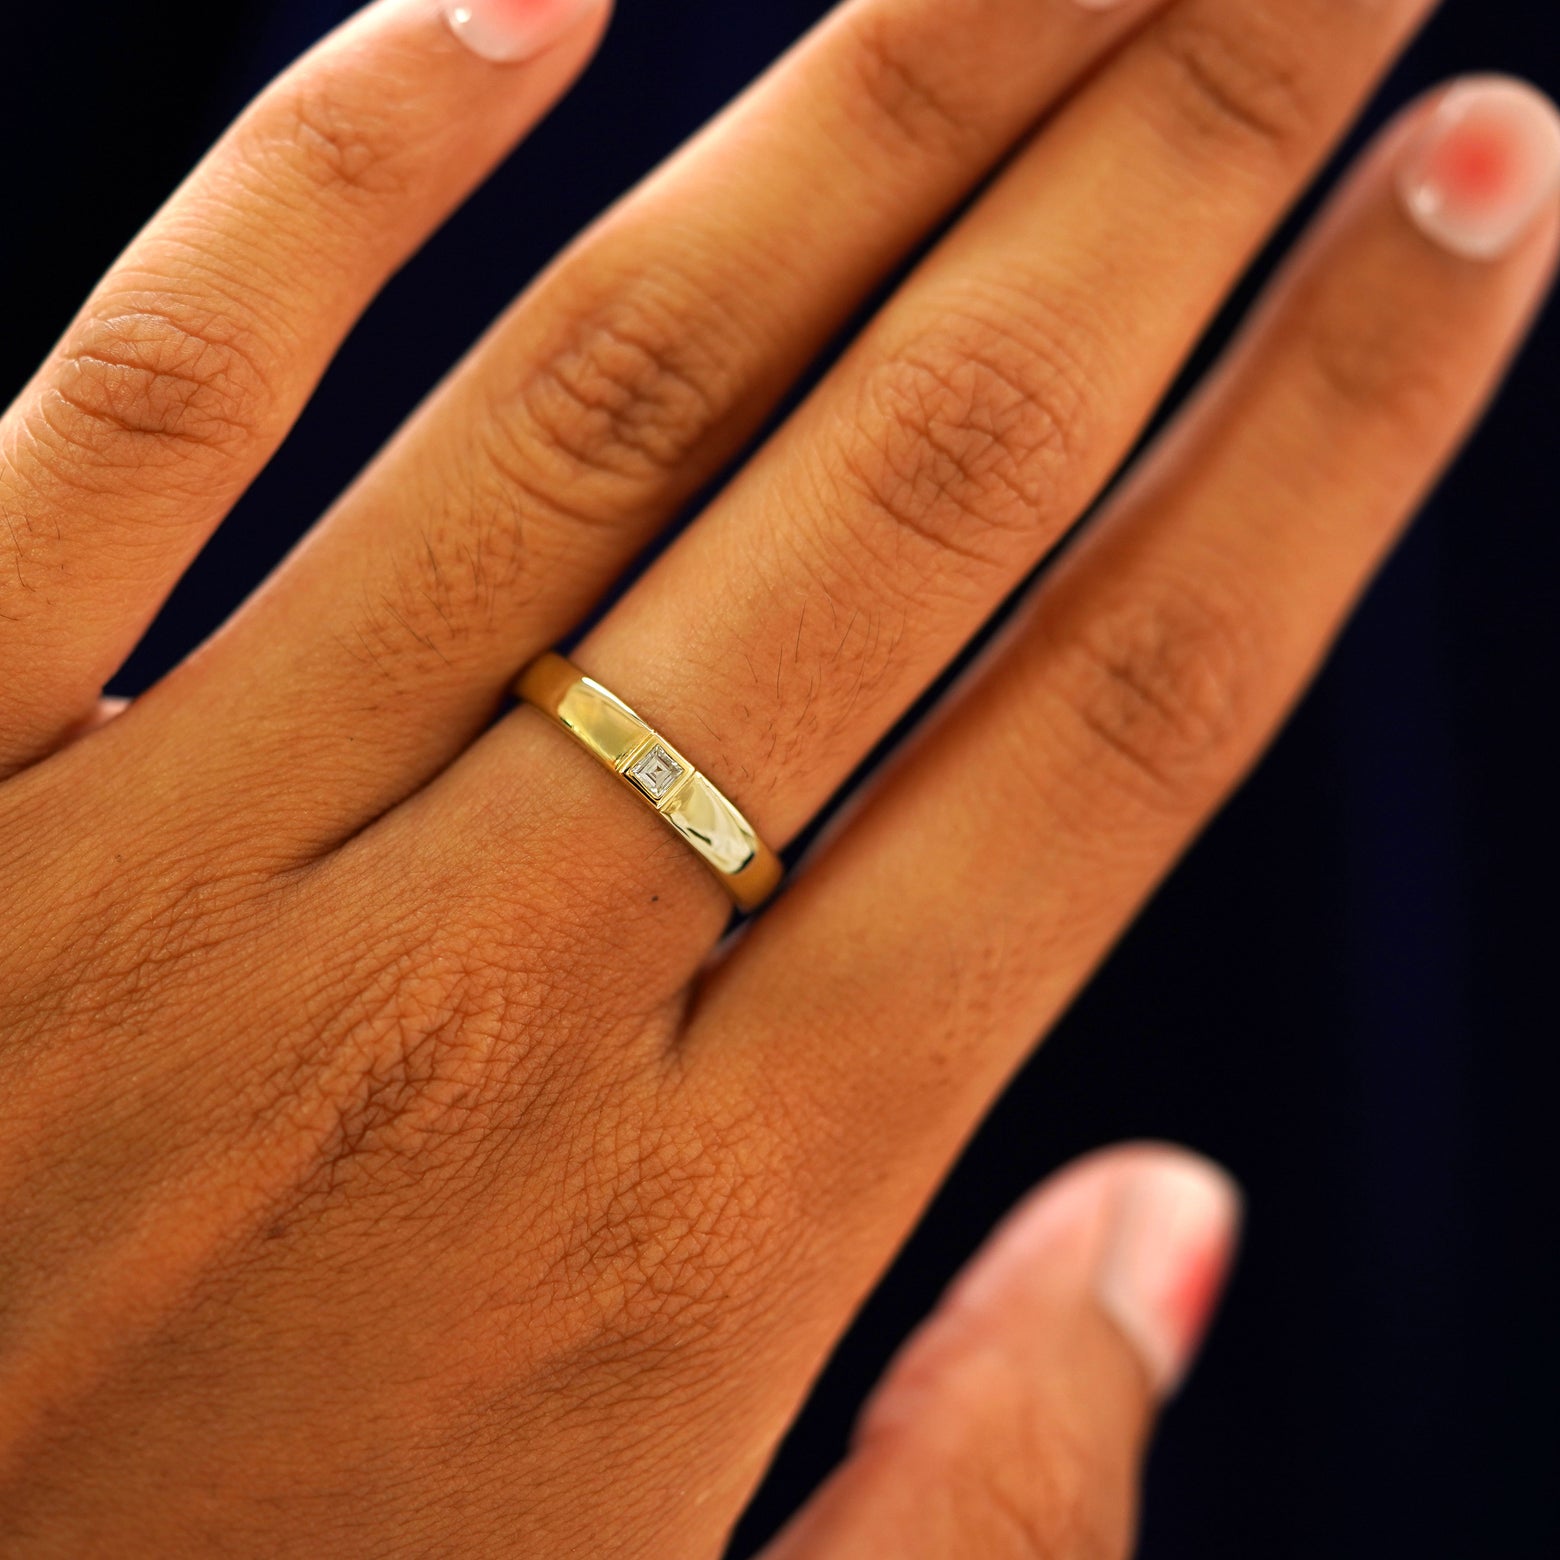 Close up view of a model's hand wearing a yellow gold Square Carre Cut Diamond Band